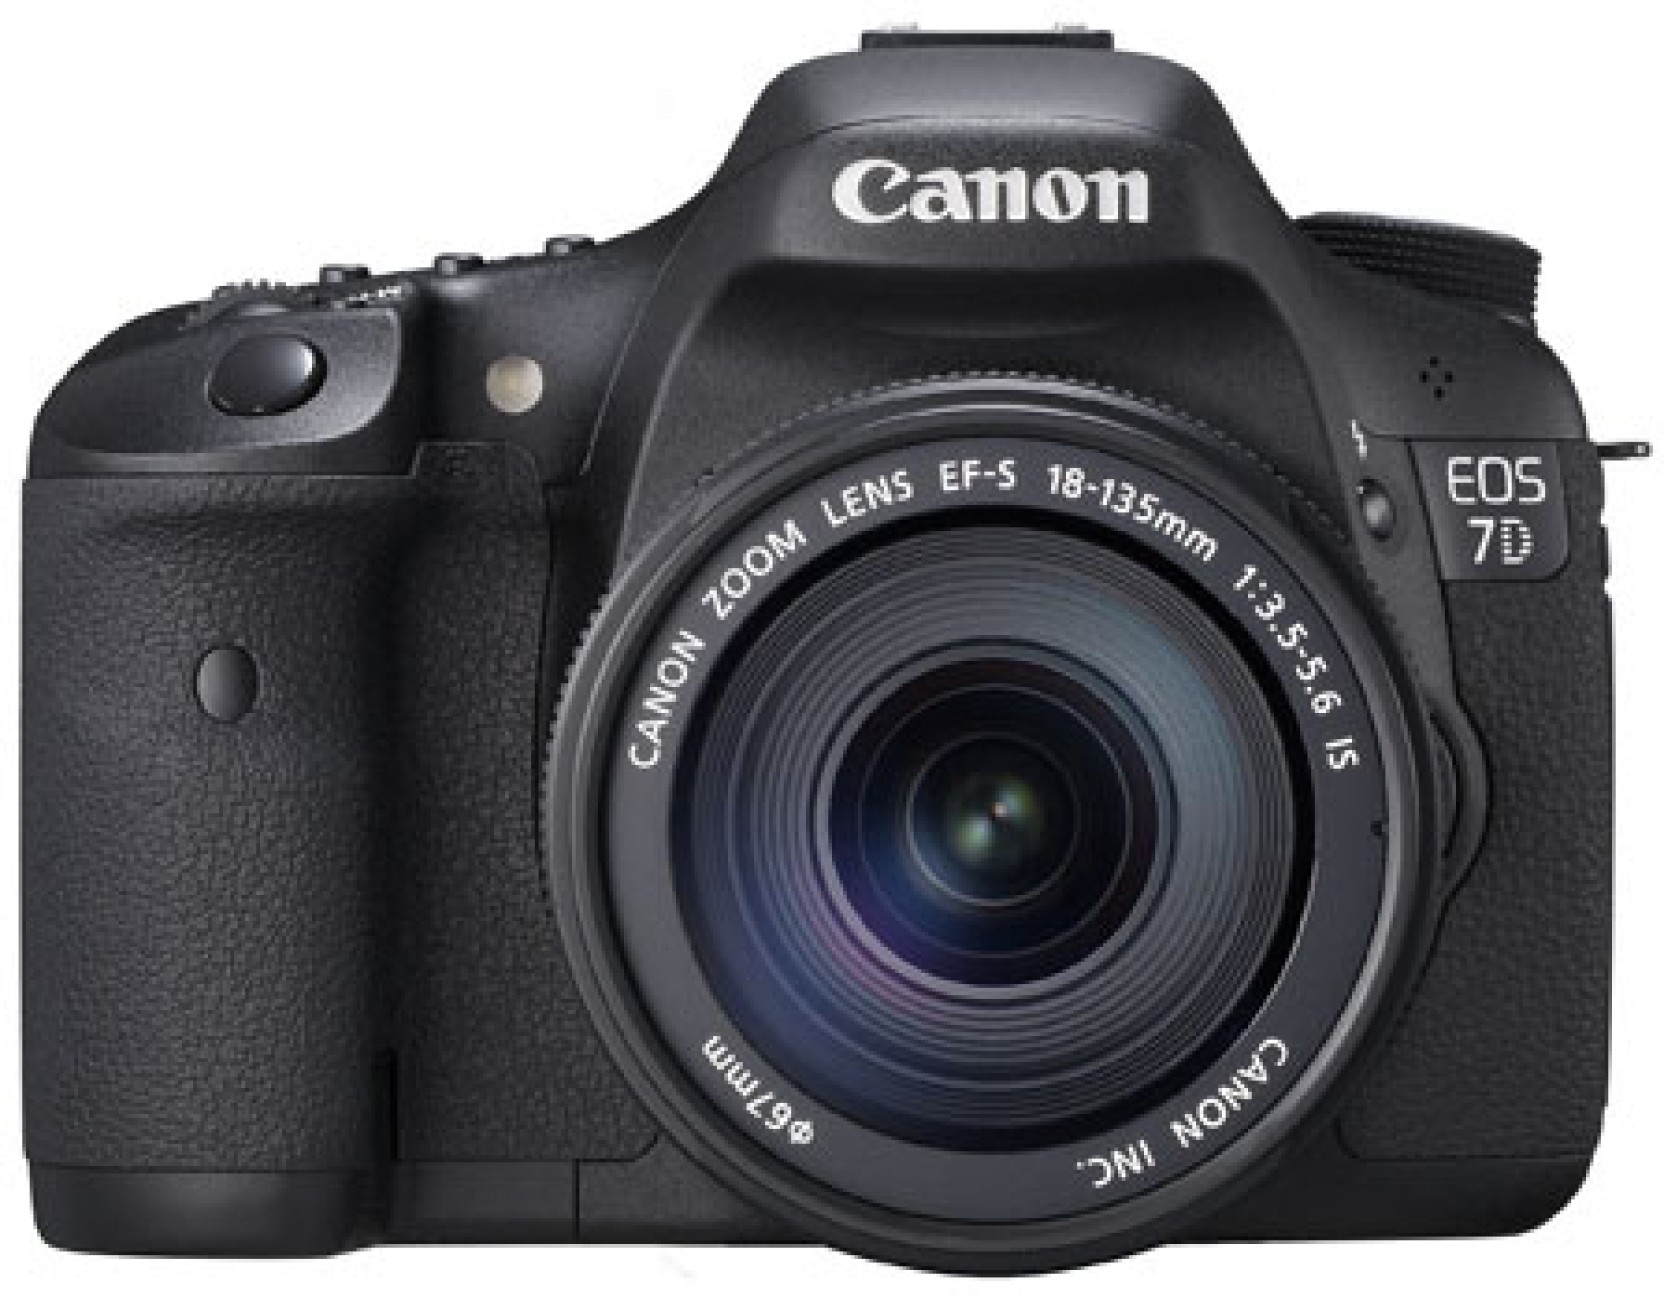 canon eos 7d manual free download